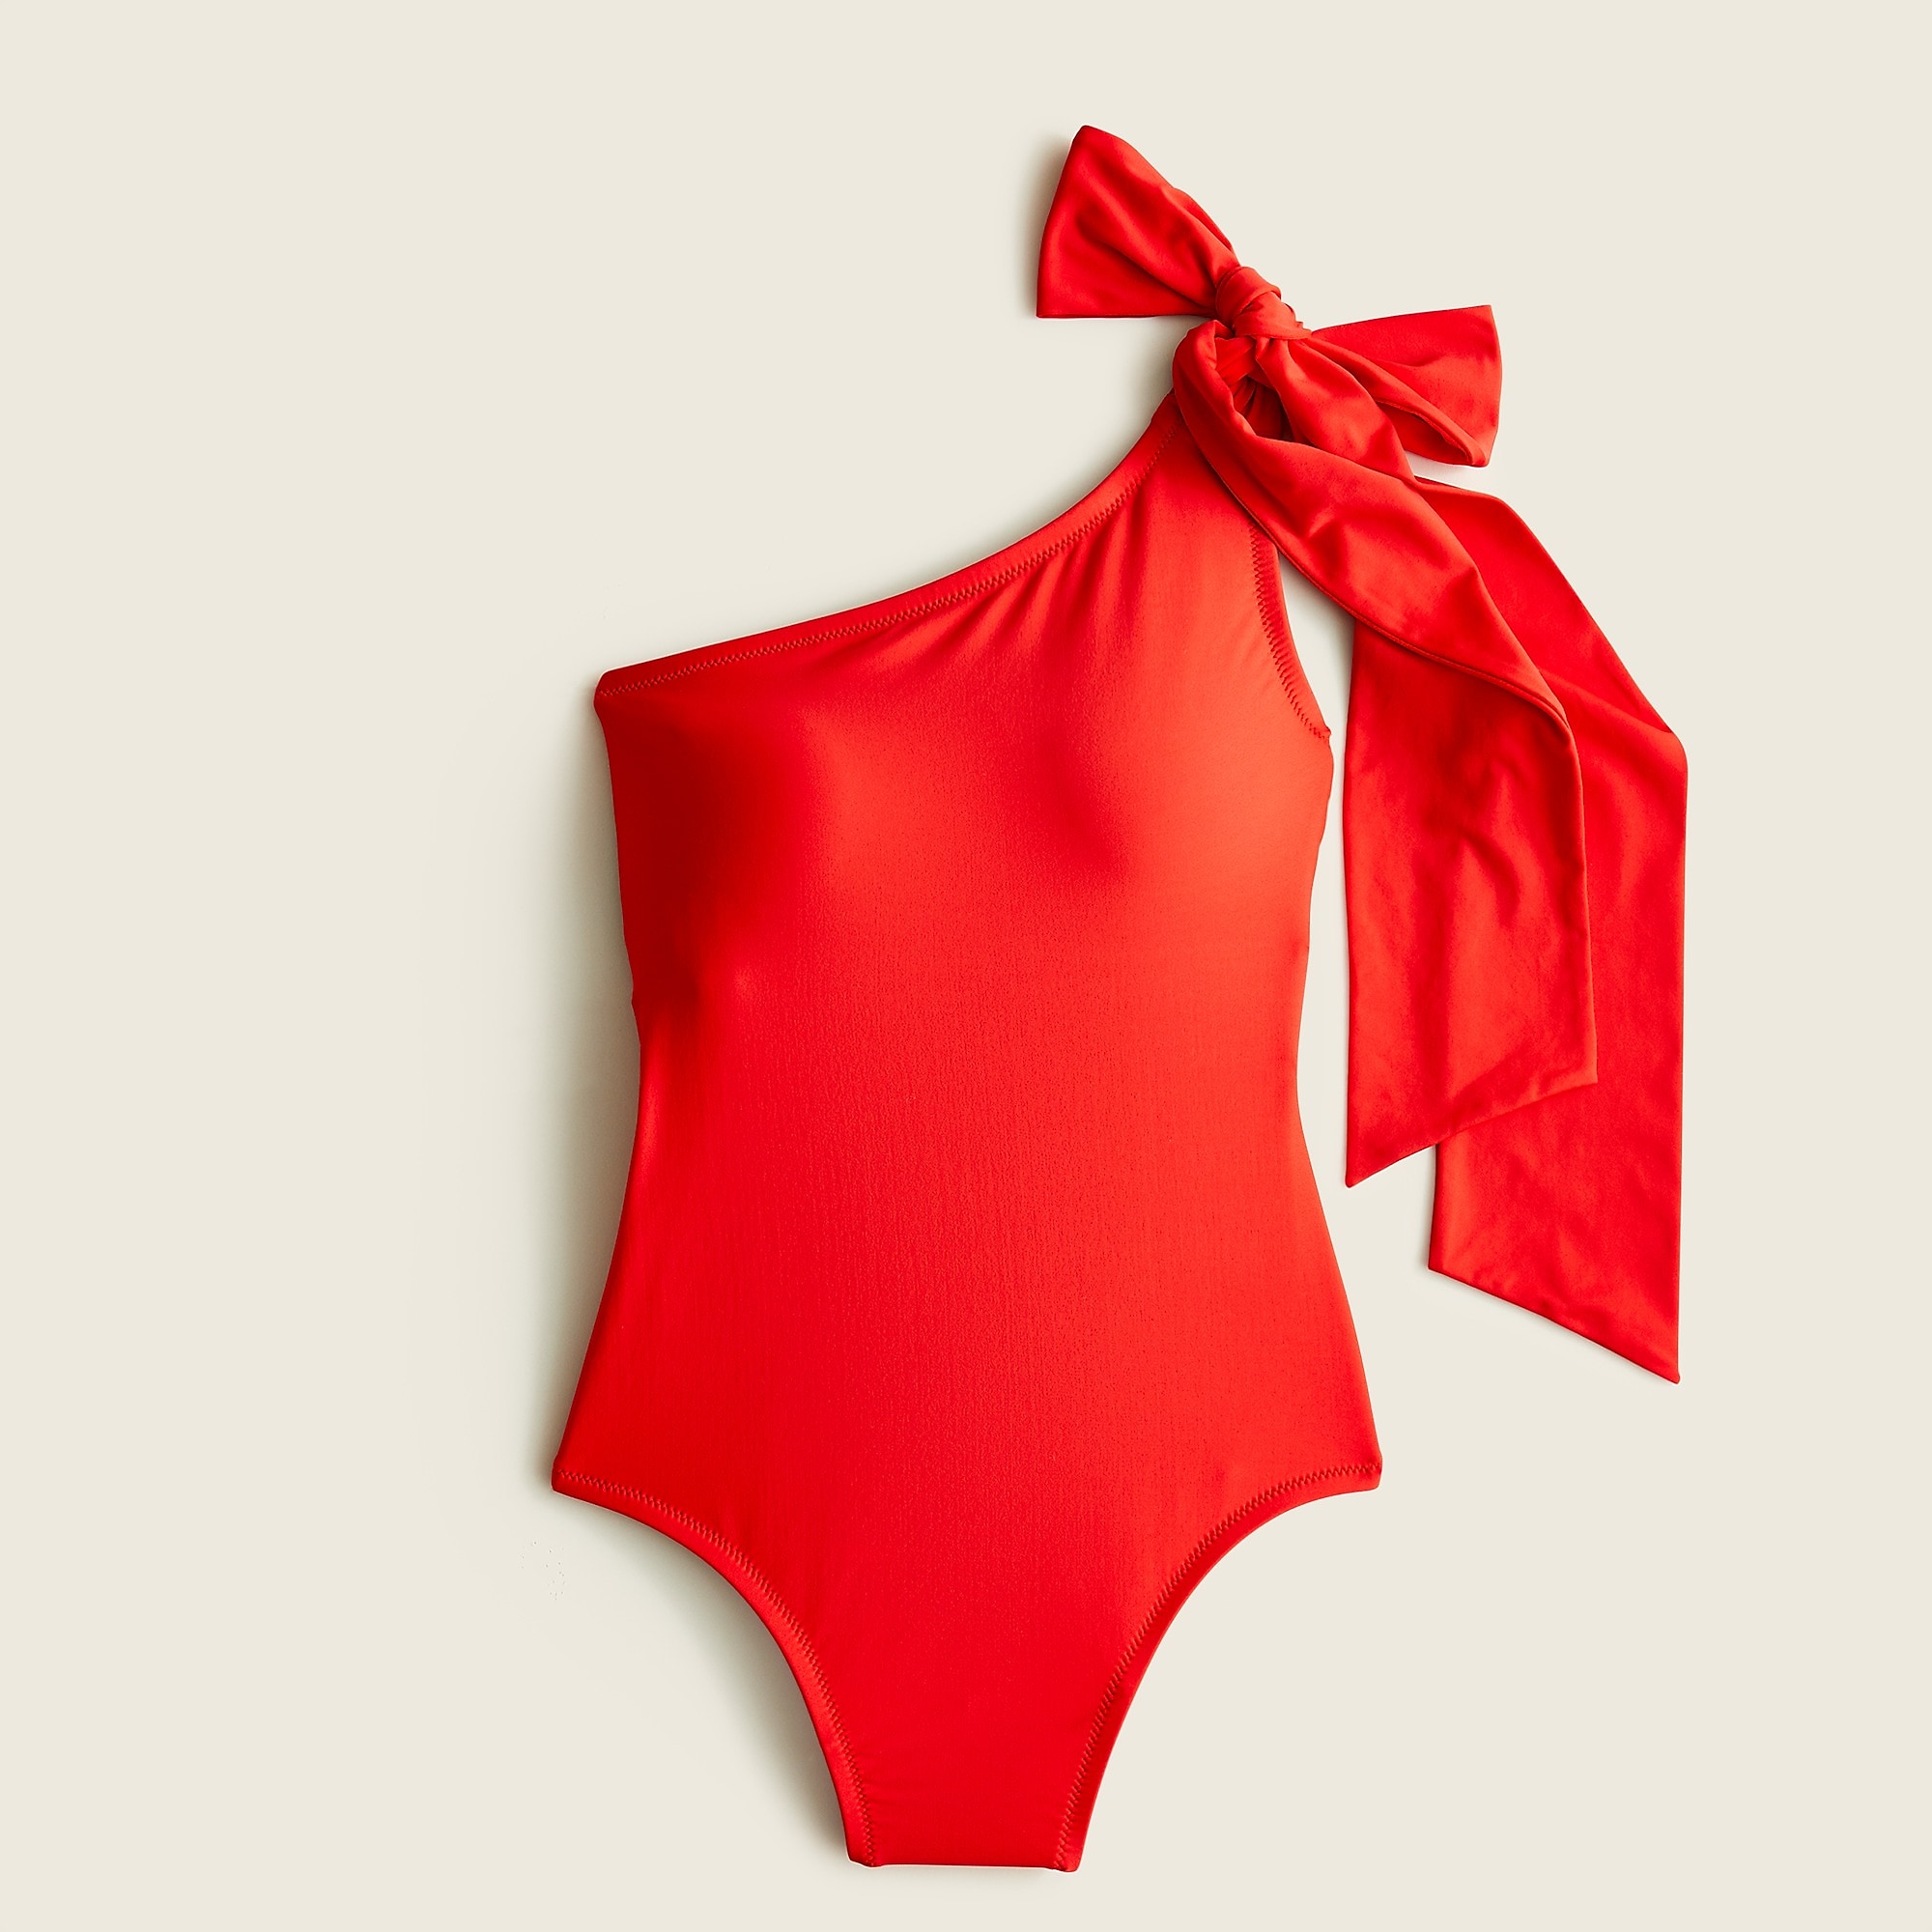 J Crew Bow Tie One Shoulder One Piece Swimsuit For Women